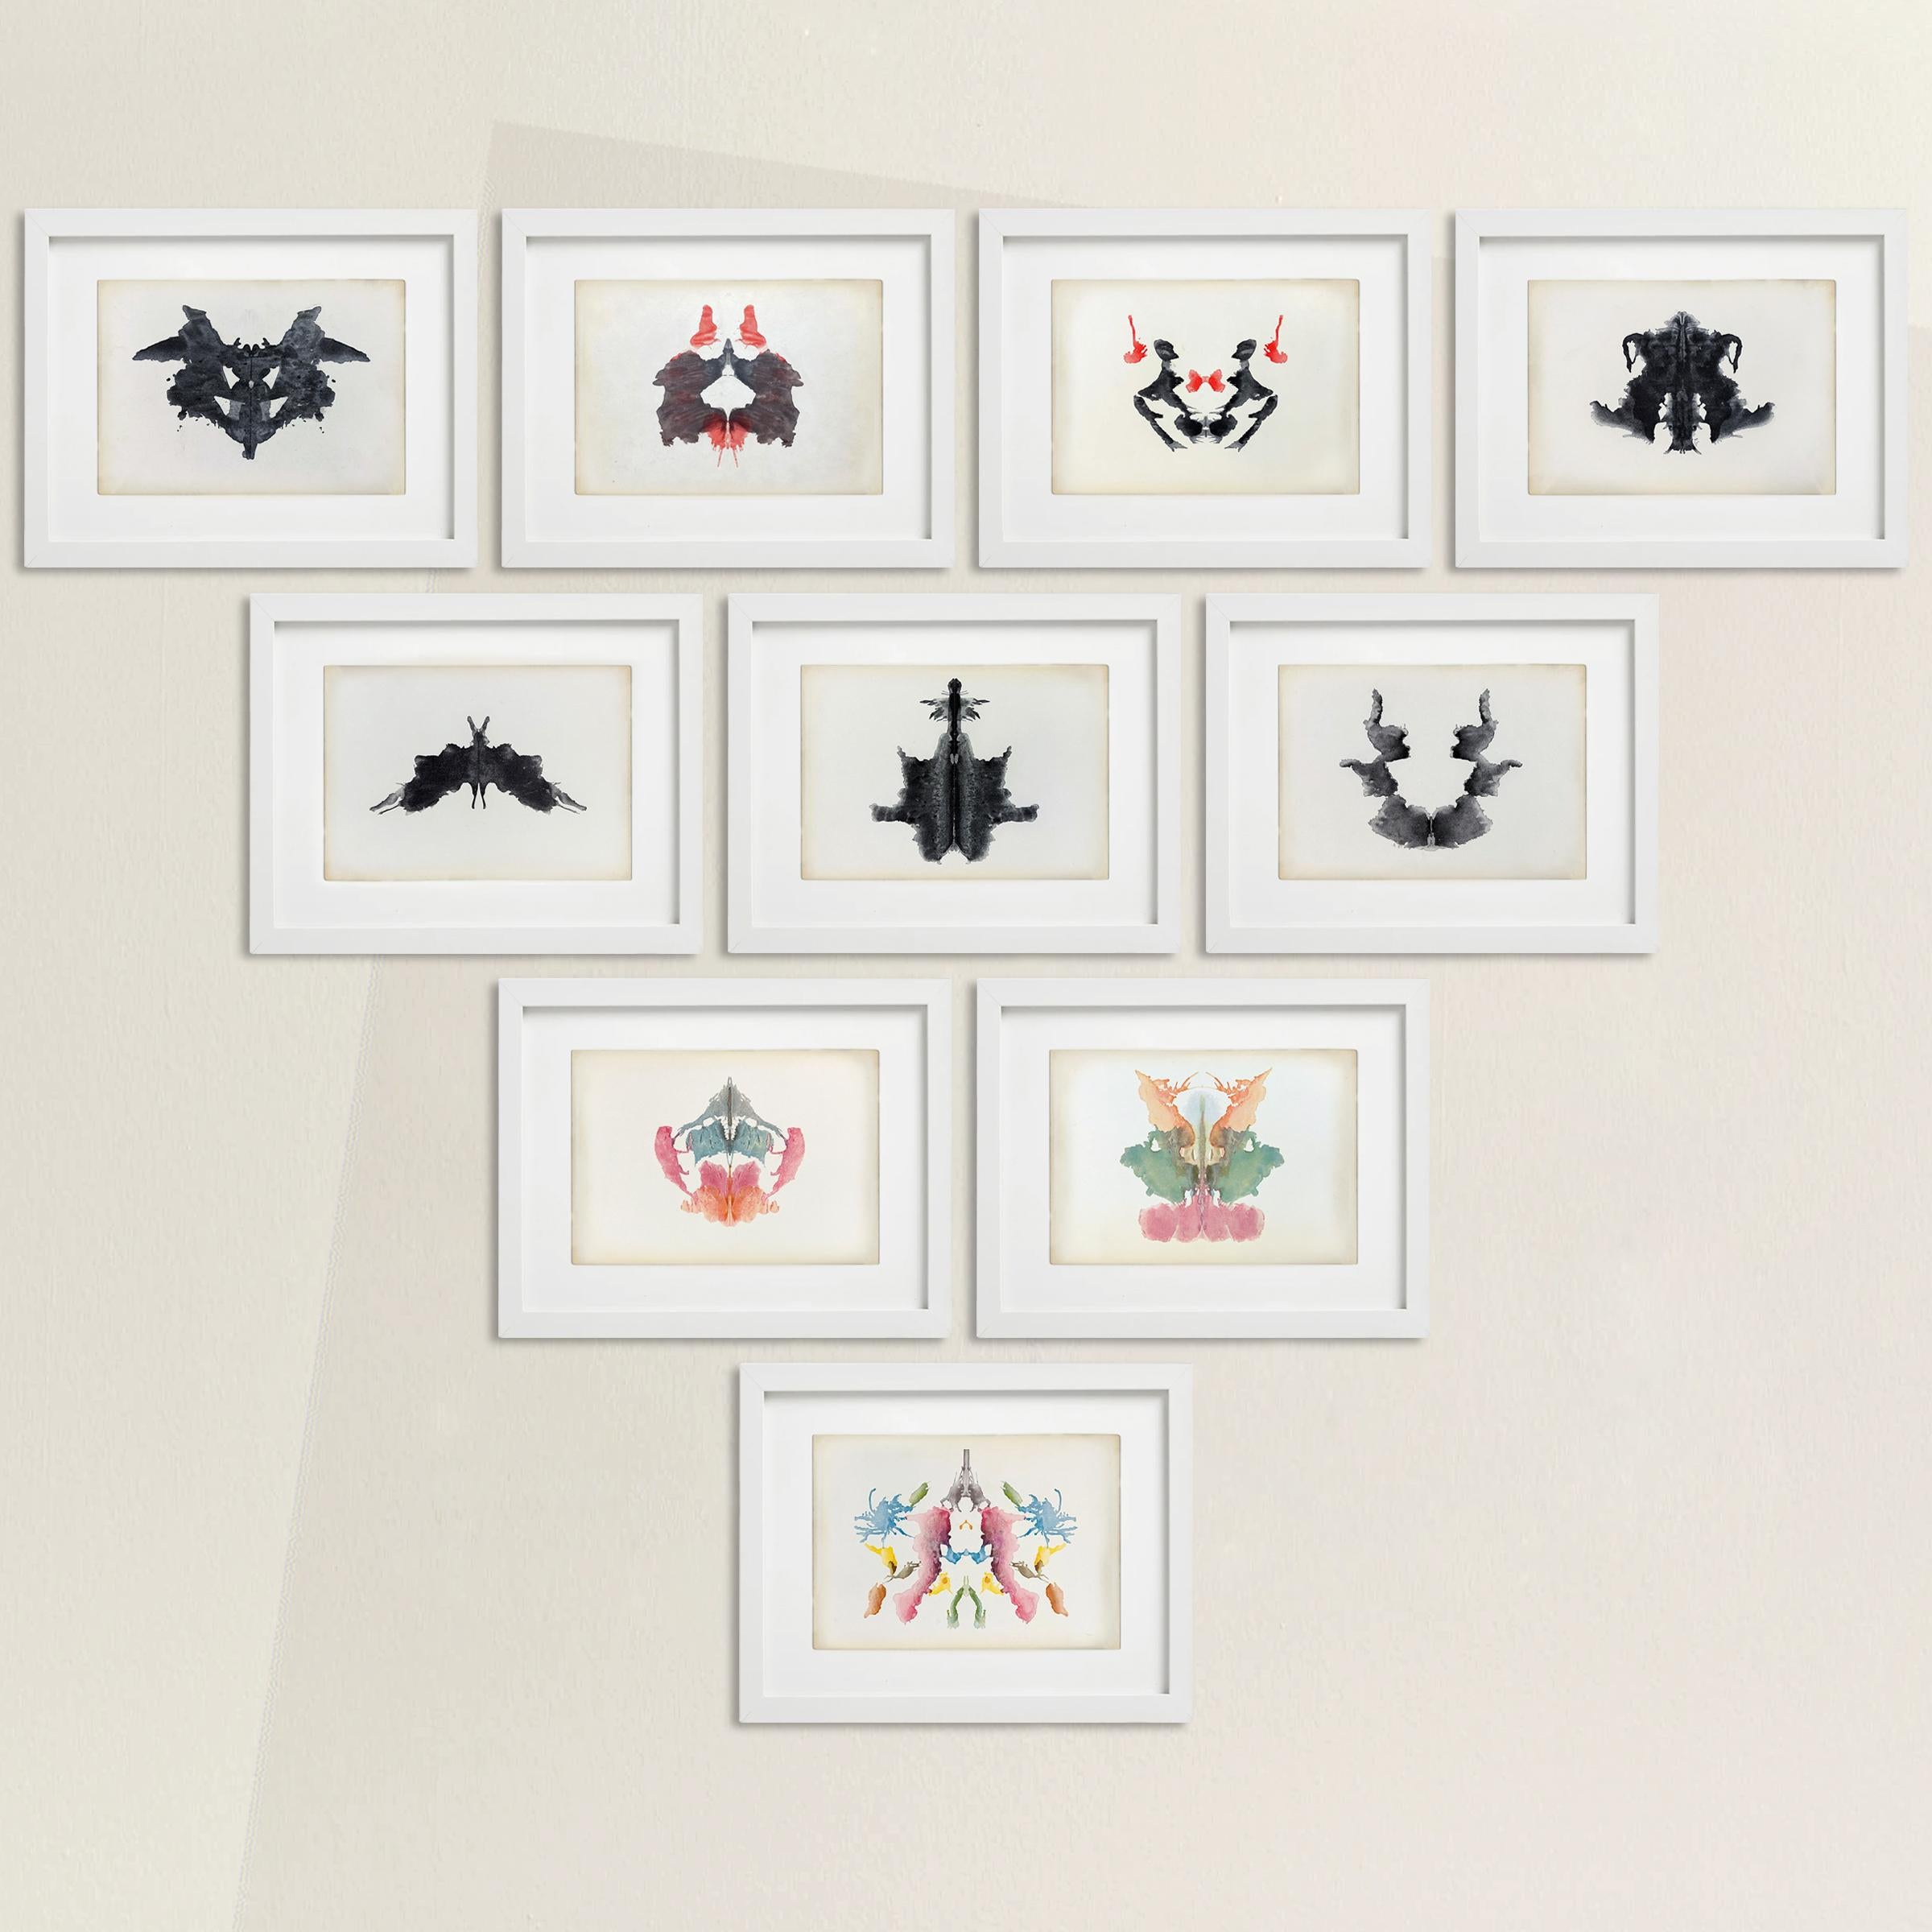 A remarkable set of ten mid-20th century original Rorschach inkblot cards in full black & white and color printing, and framed behind glass in white gallery frames.